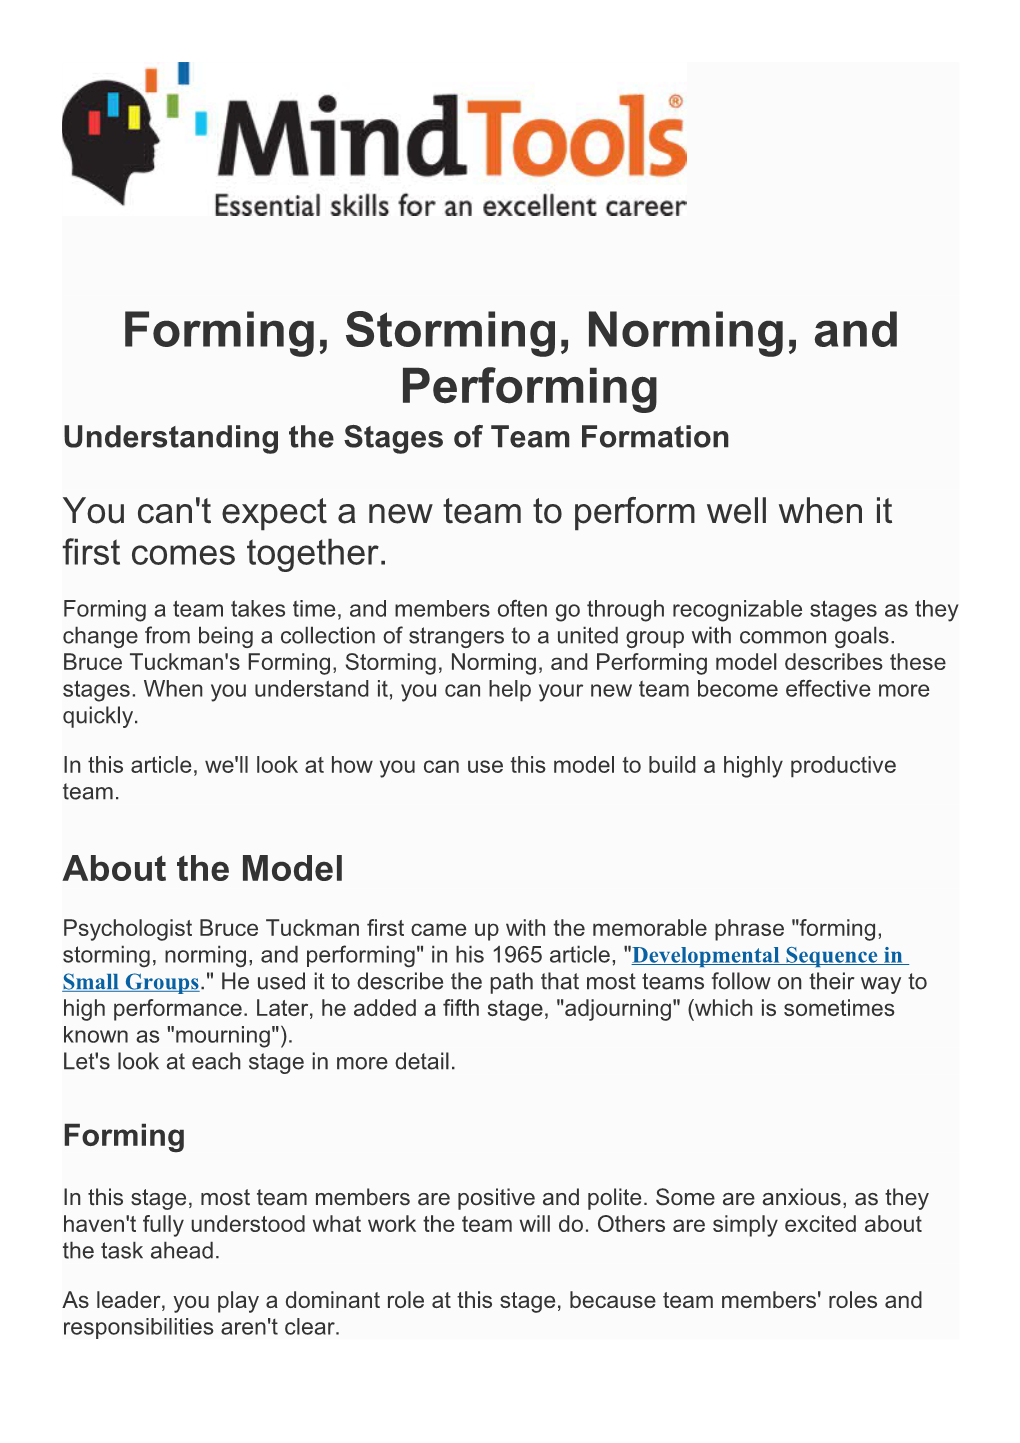 Forming, Storming, Norming, and Performing